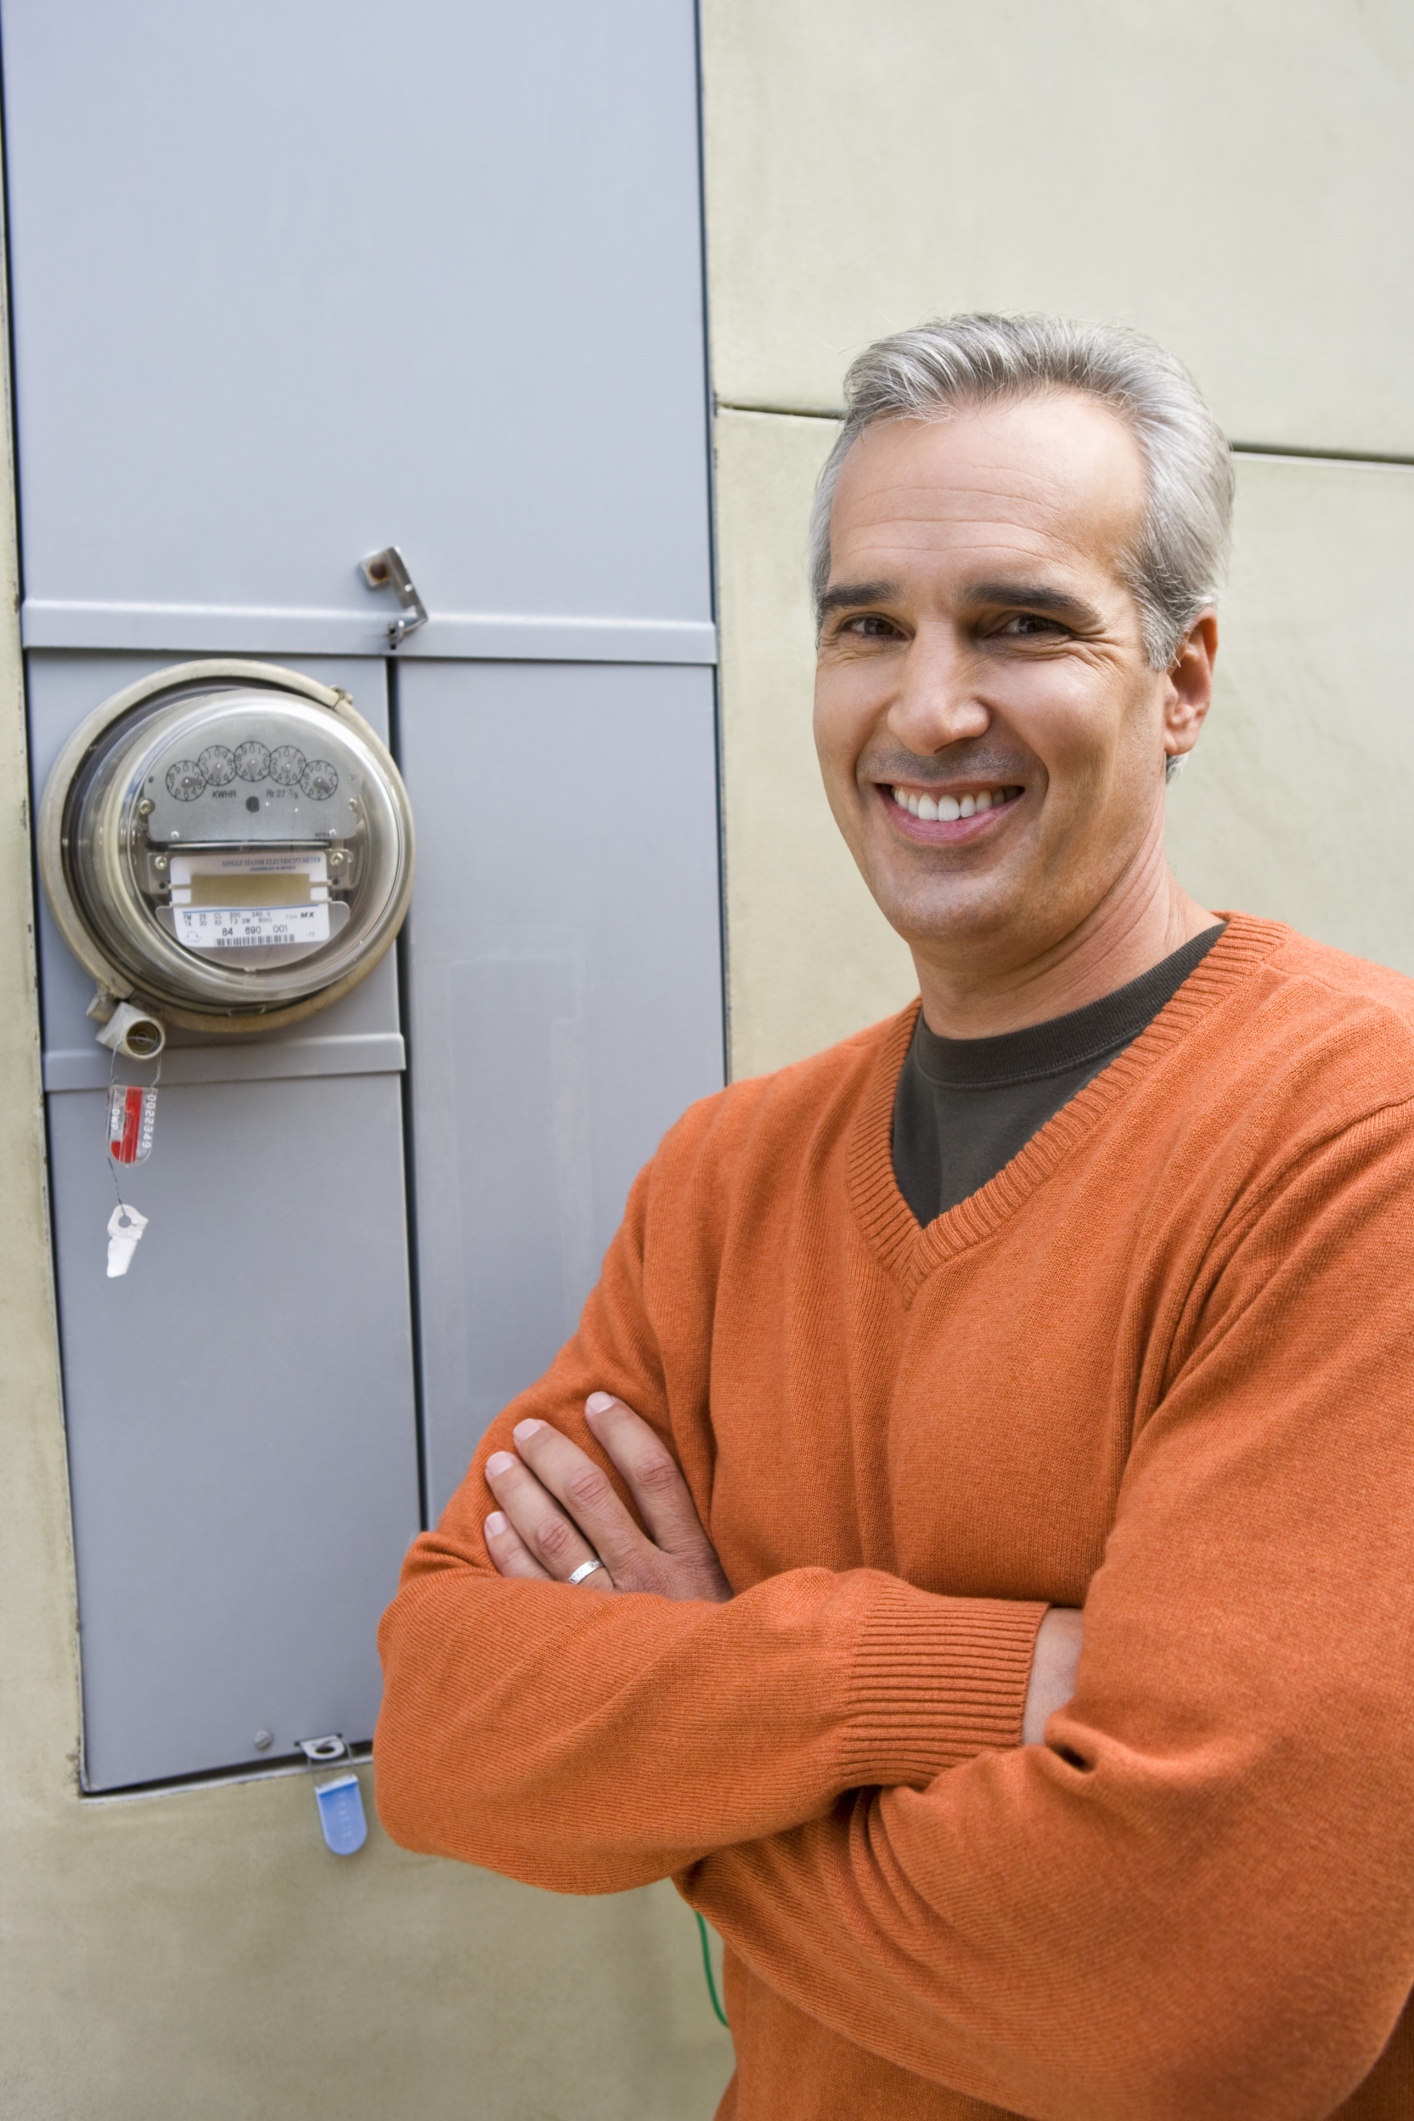 How to Relocate an Electric Meter